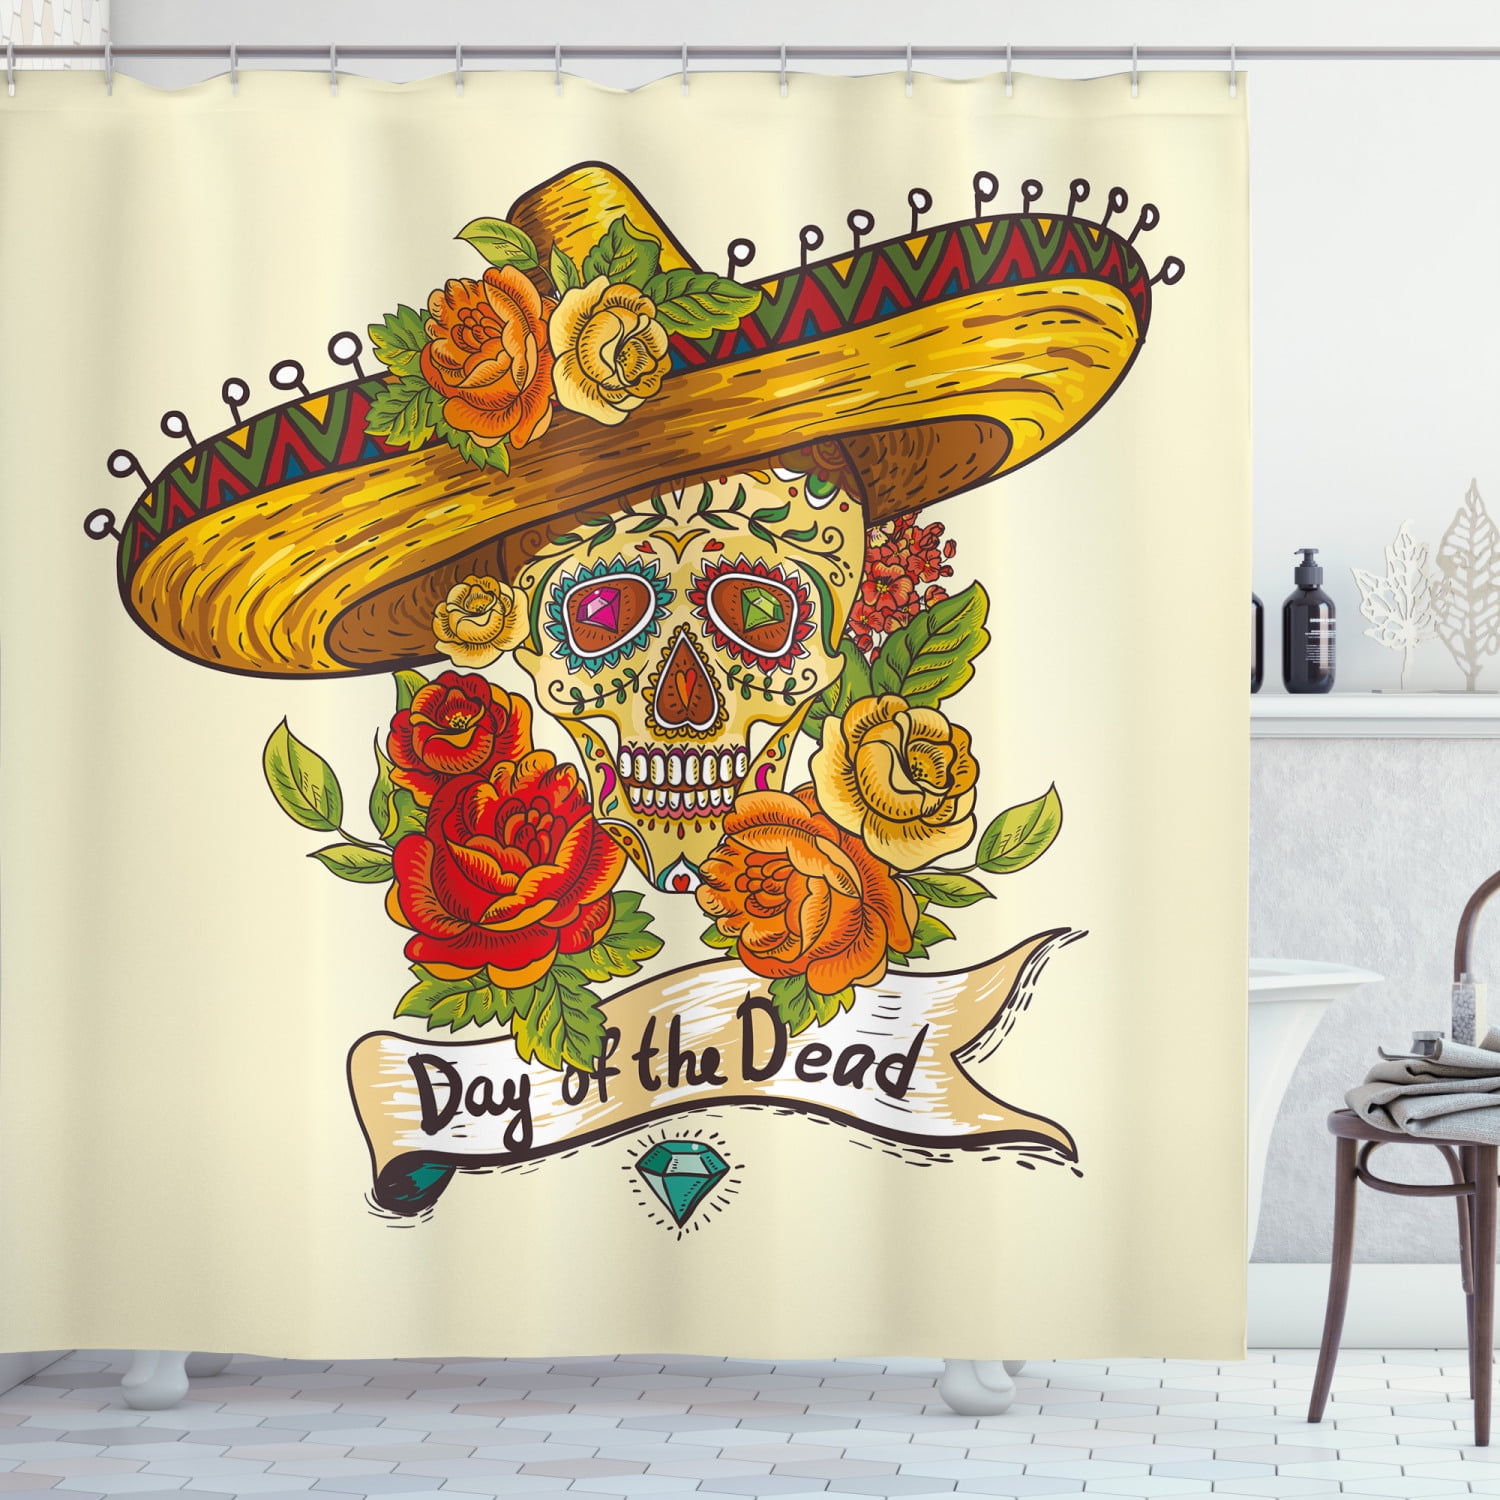 Bathroom Mat Shower Curtain Day of The Dead Floral Skull in Sombrero Waterproof 